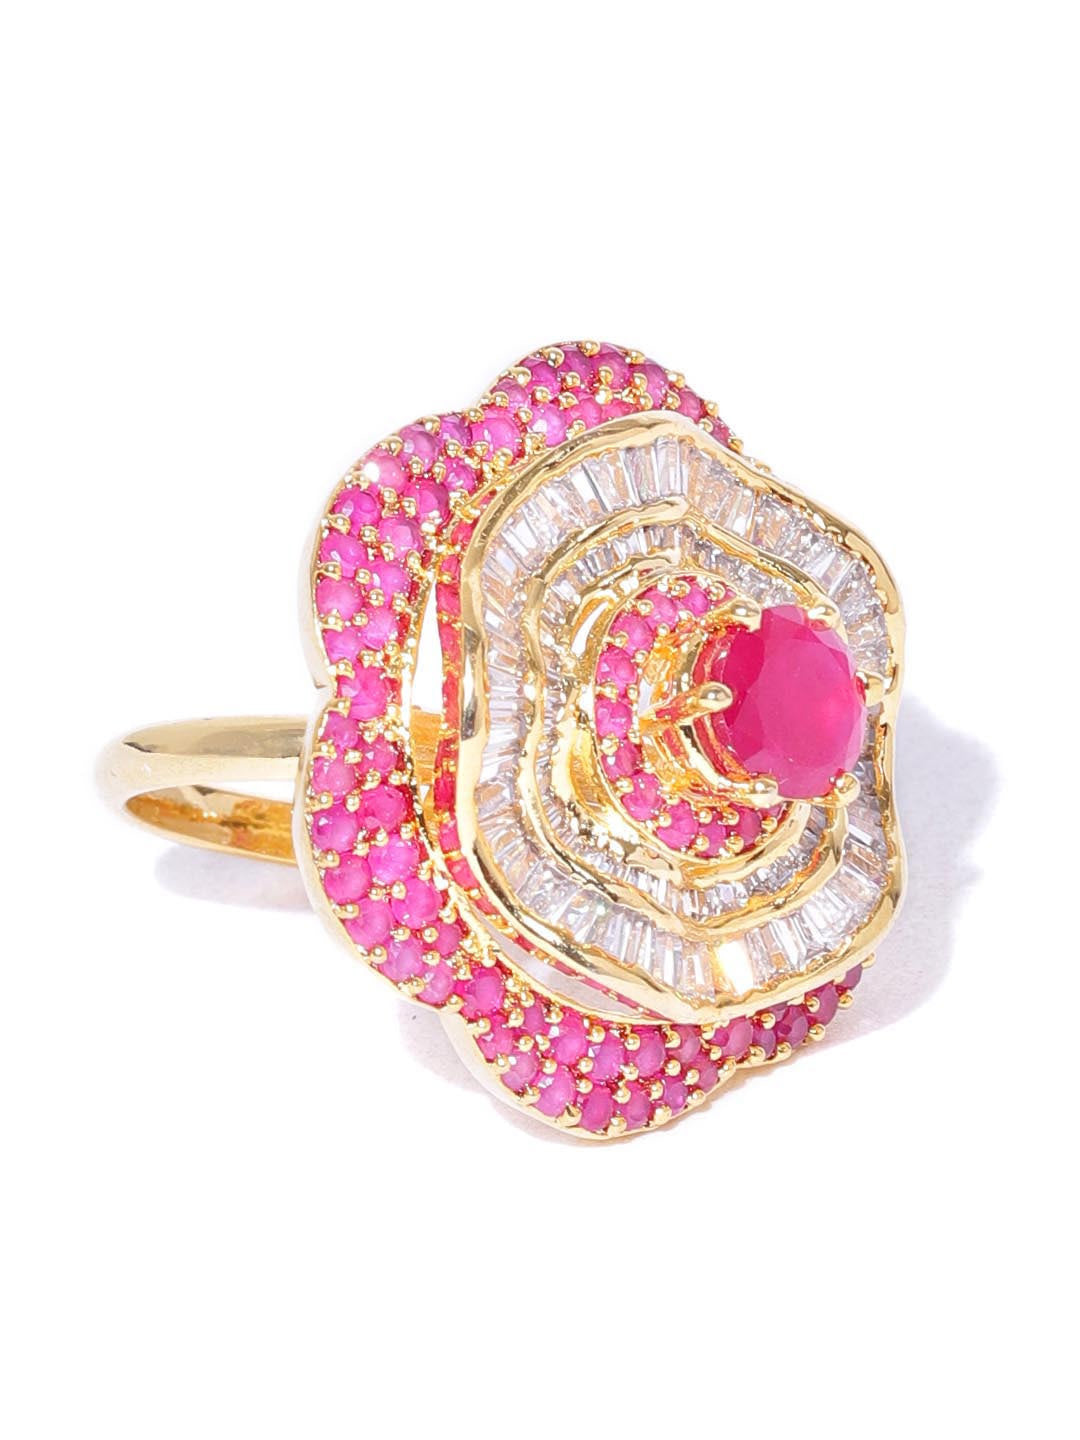 Stylish Floral Shaped Pink And White American Diamond Ring For Women And Girls